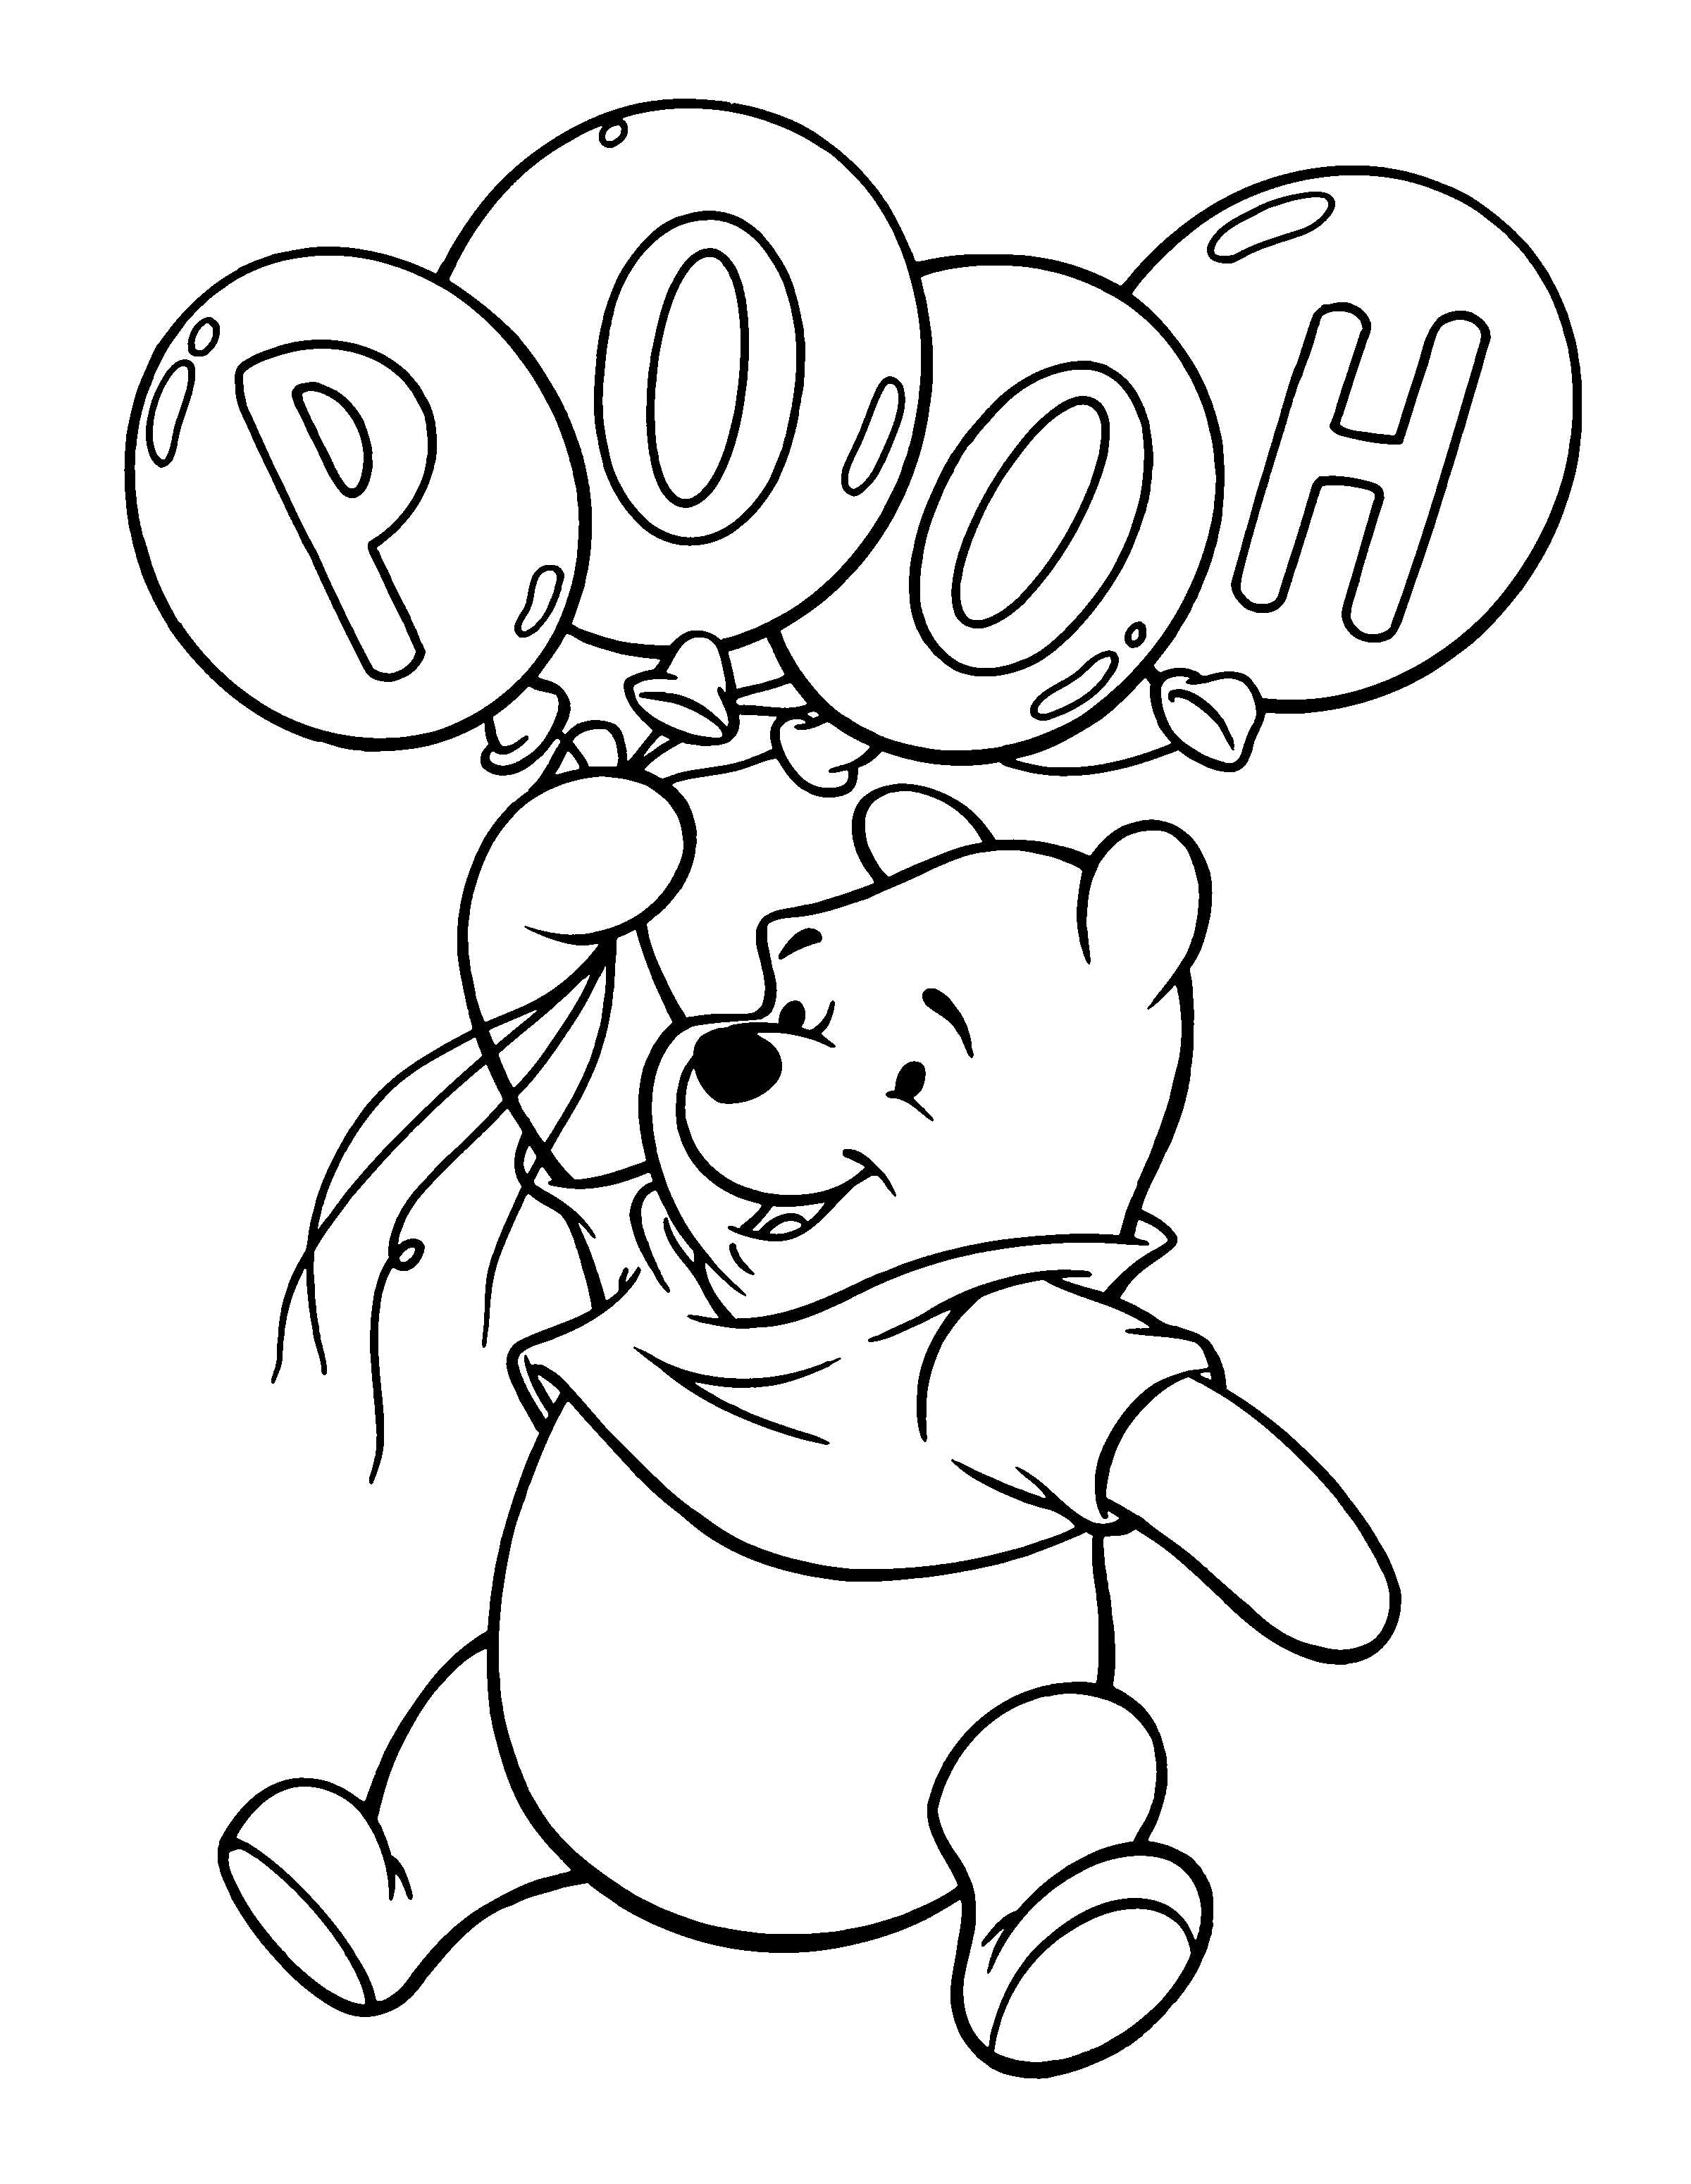 pooh bear coloring pictures winnie the pooh bear giggles coloring page h m coloring bear pictures pooh 